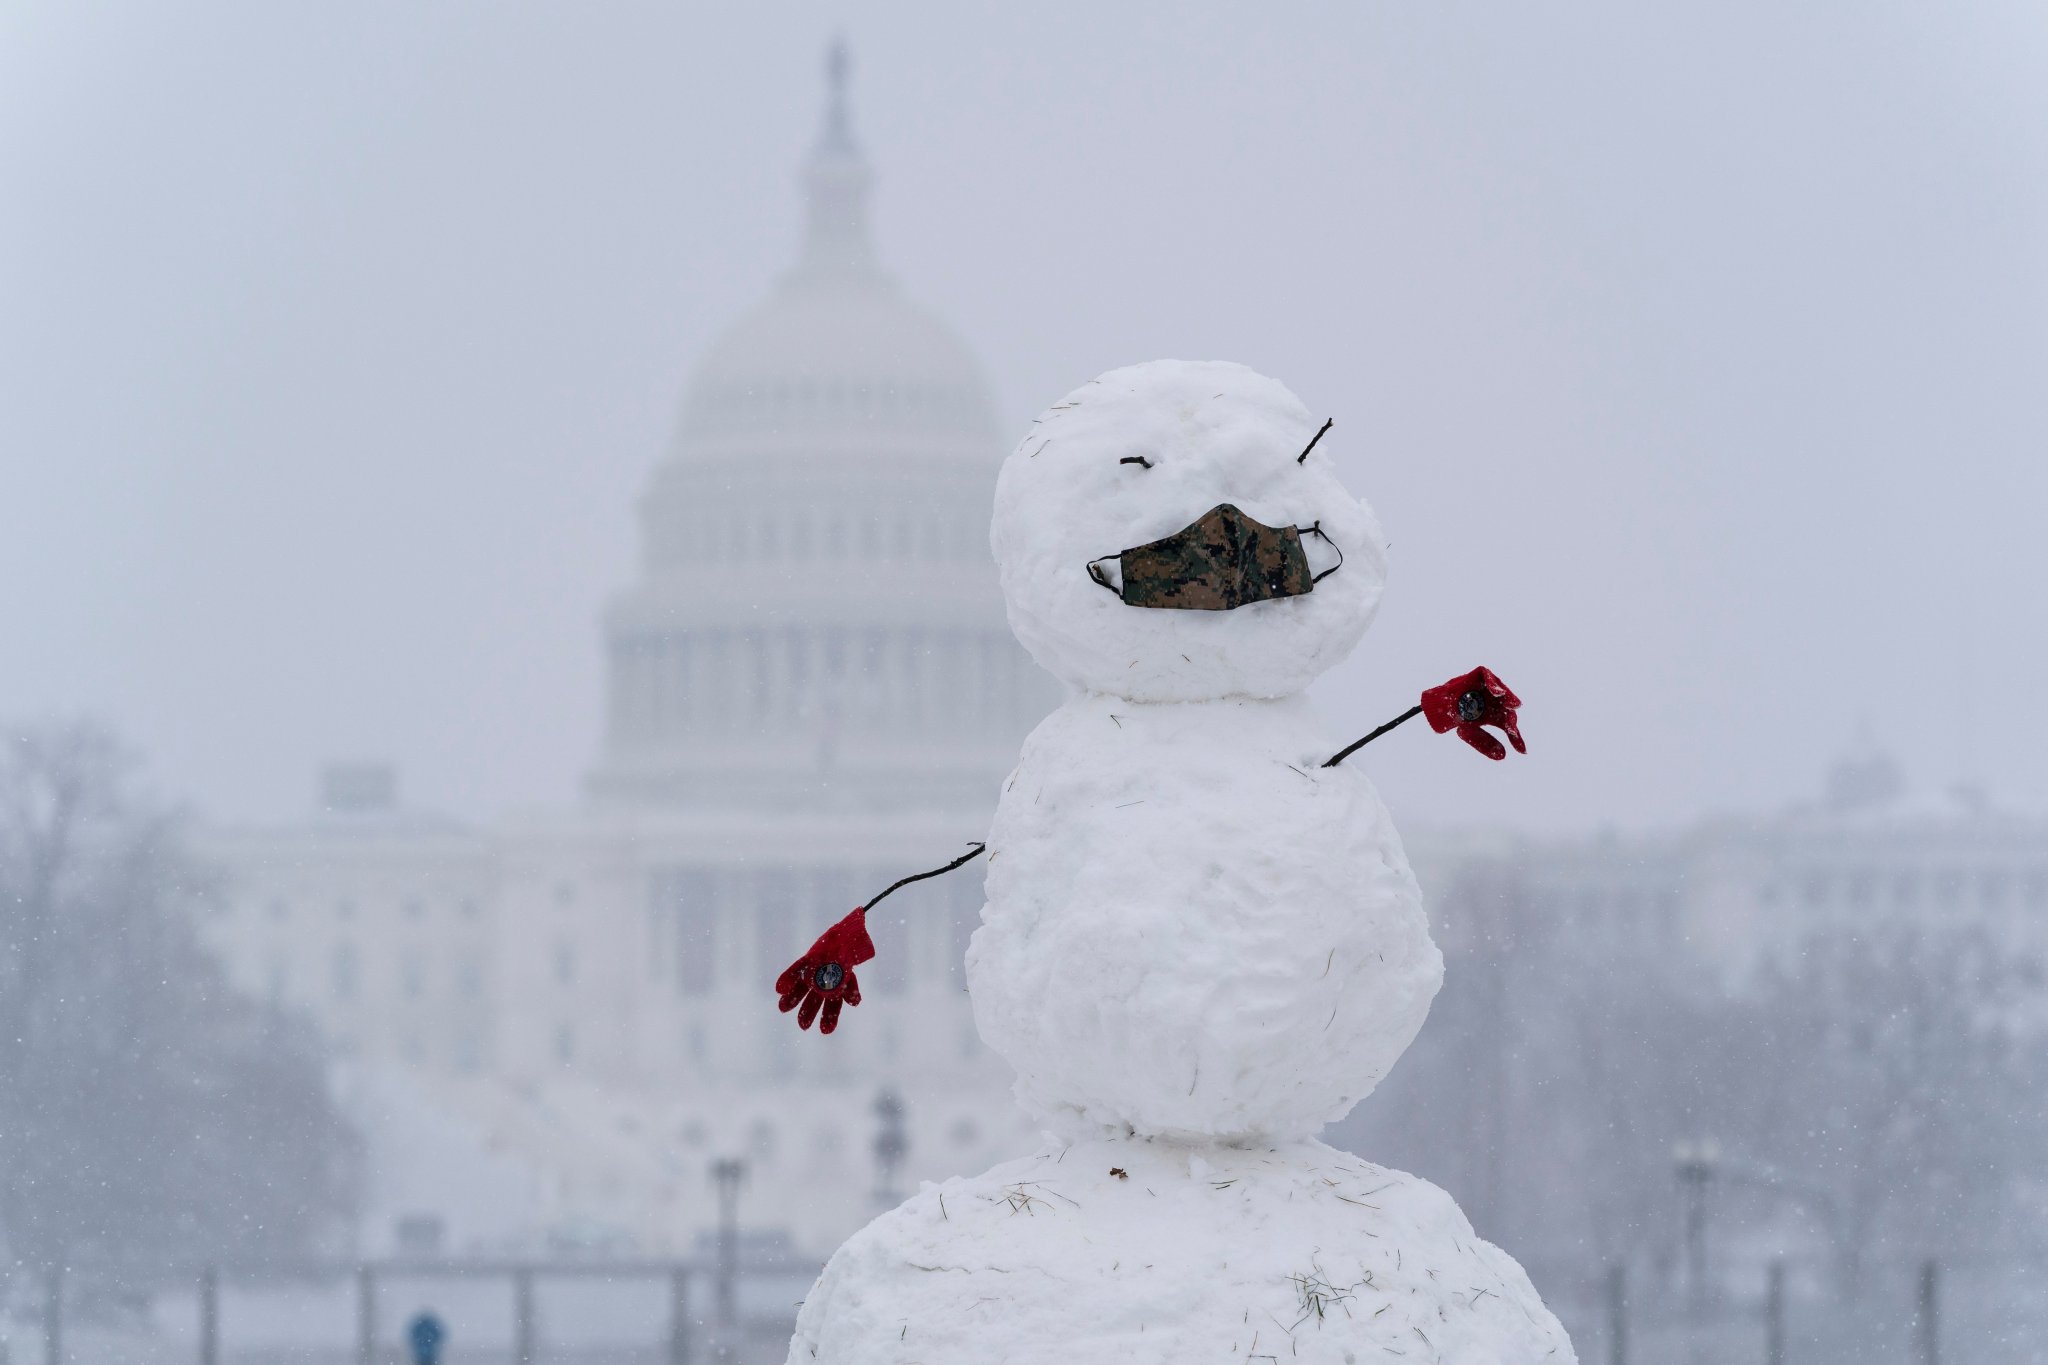 Senate confirmation vote on homeland security secretary delayed after DC gets 2 inches of snow